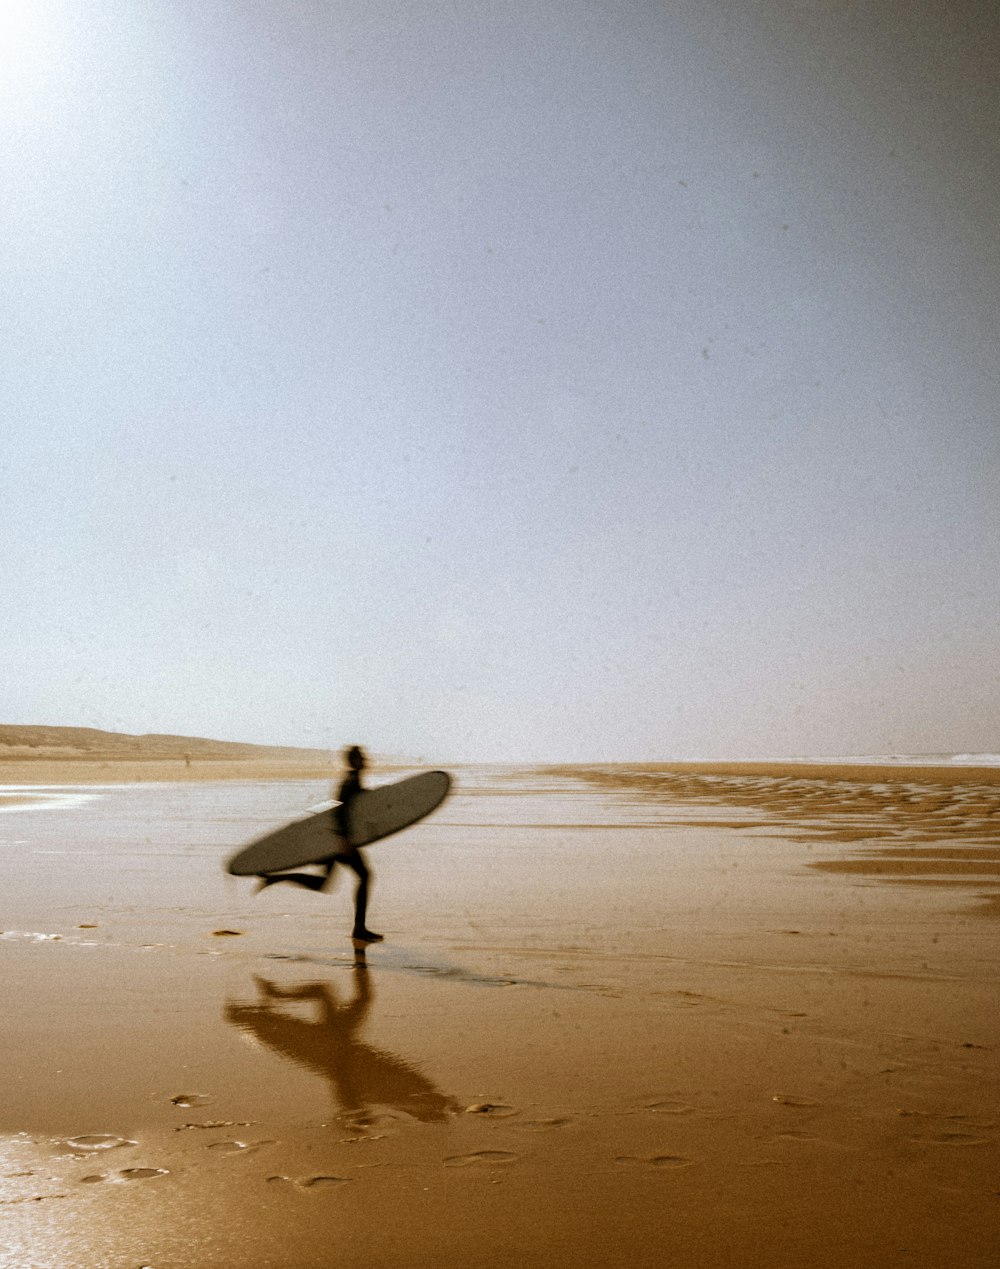 a person with a surfboard walking on a beach